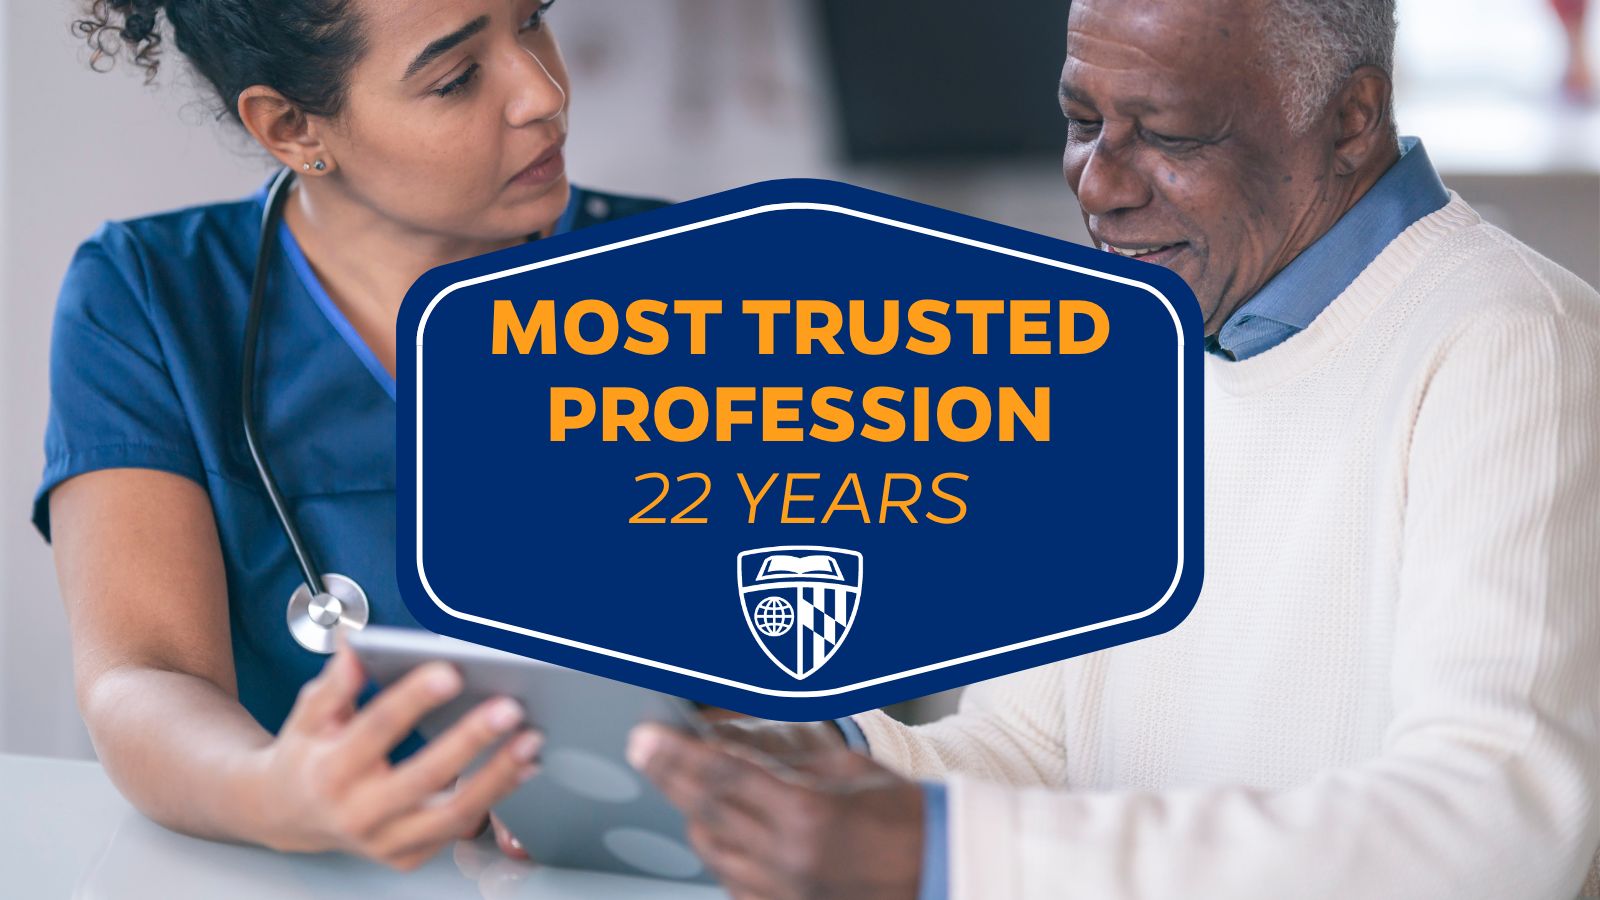 Nursing Named Most Trusted Profession for 22nd Consecutive Year